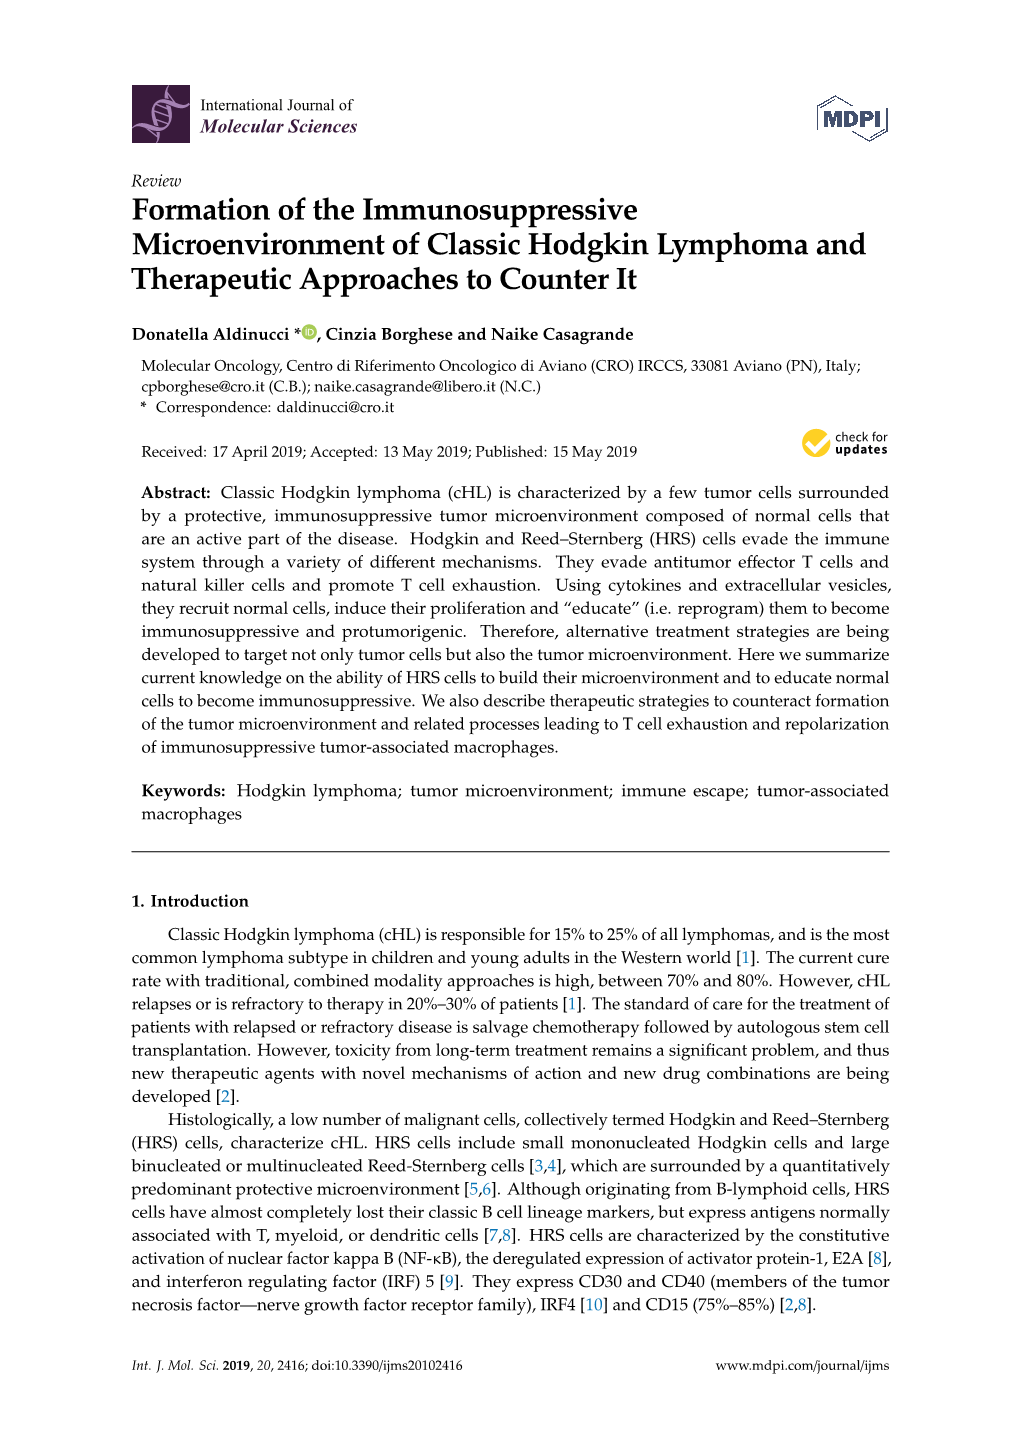 Formation of the Immunosuppressive Microenvironment of Classic Hodgkin Lymphoma and Therapeutic Approaches to Counter It